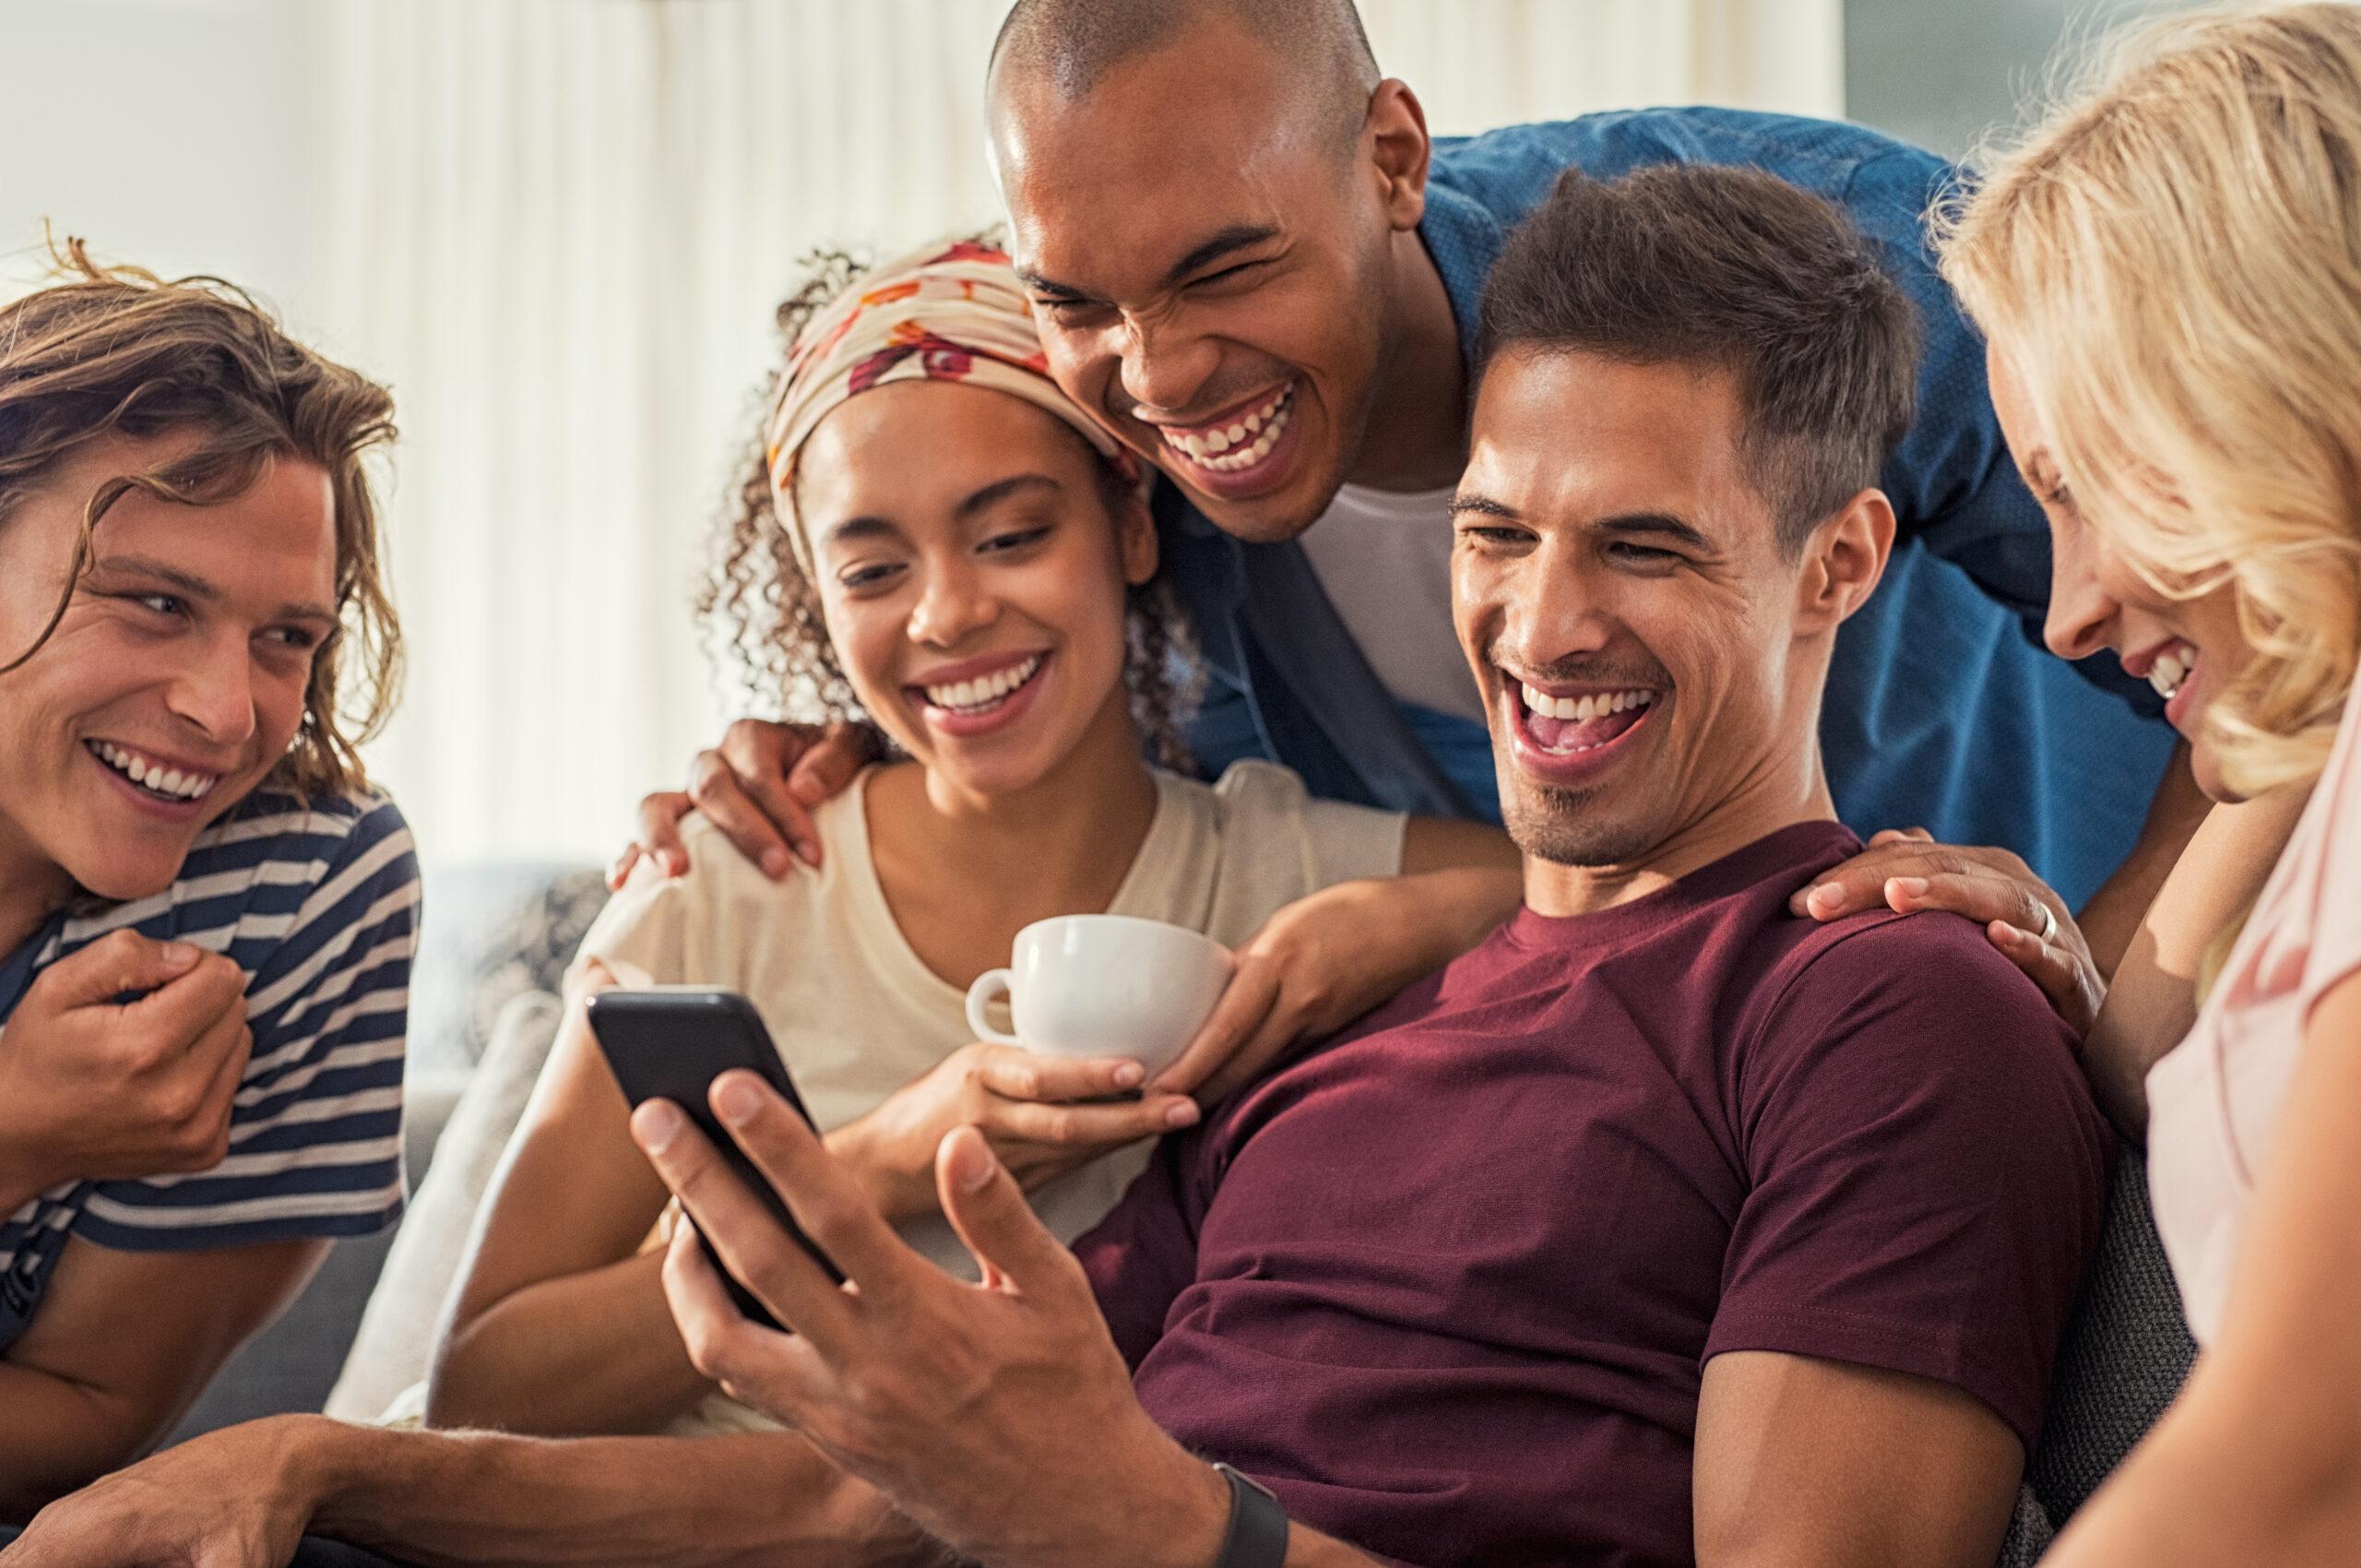 Happy friends laughing together at a meme they see on one guy's cellphone